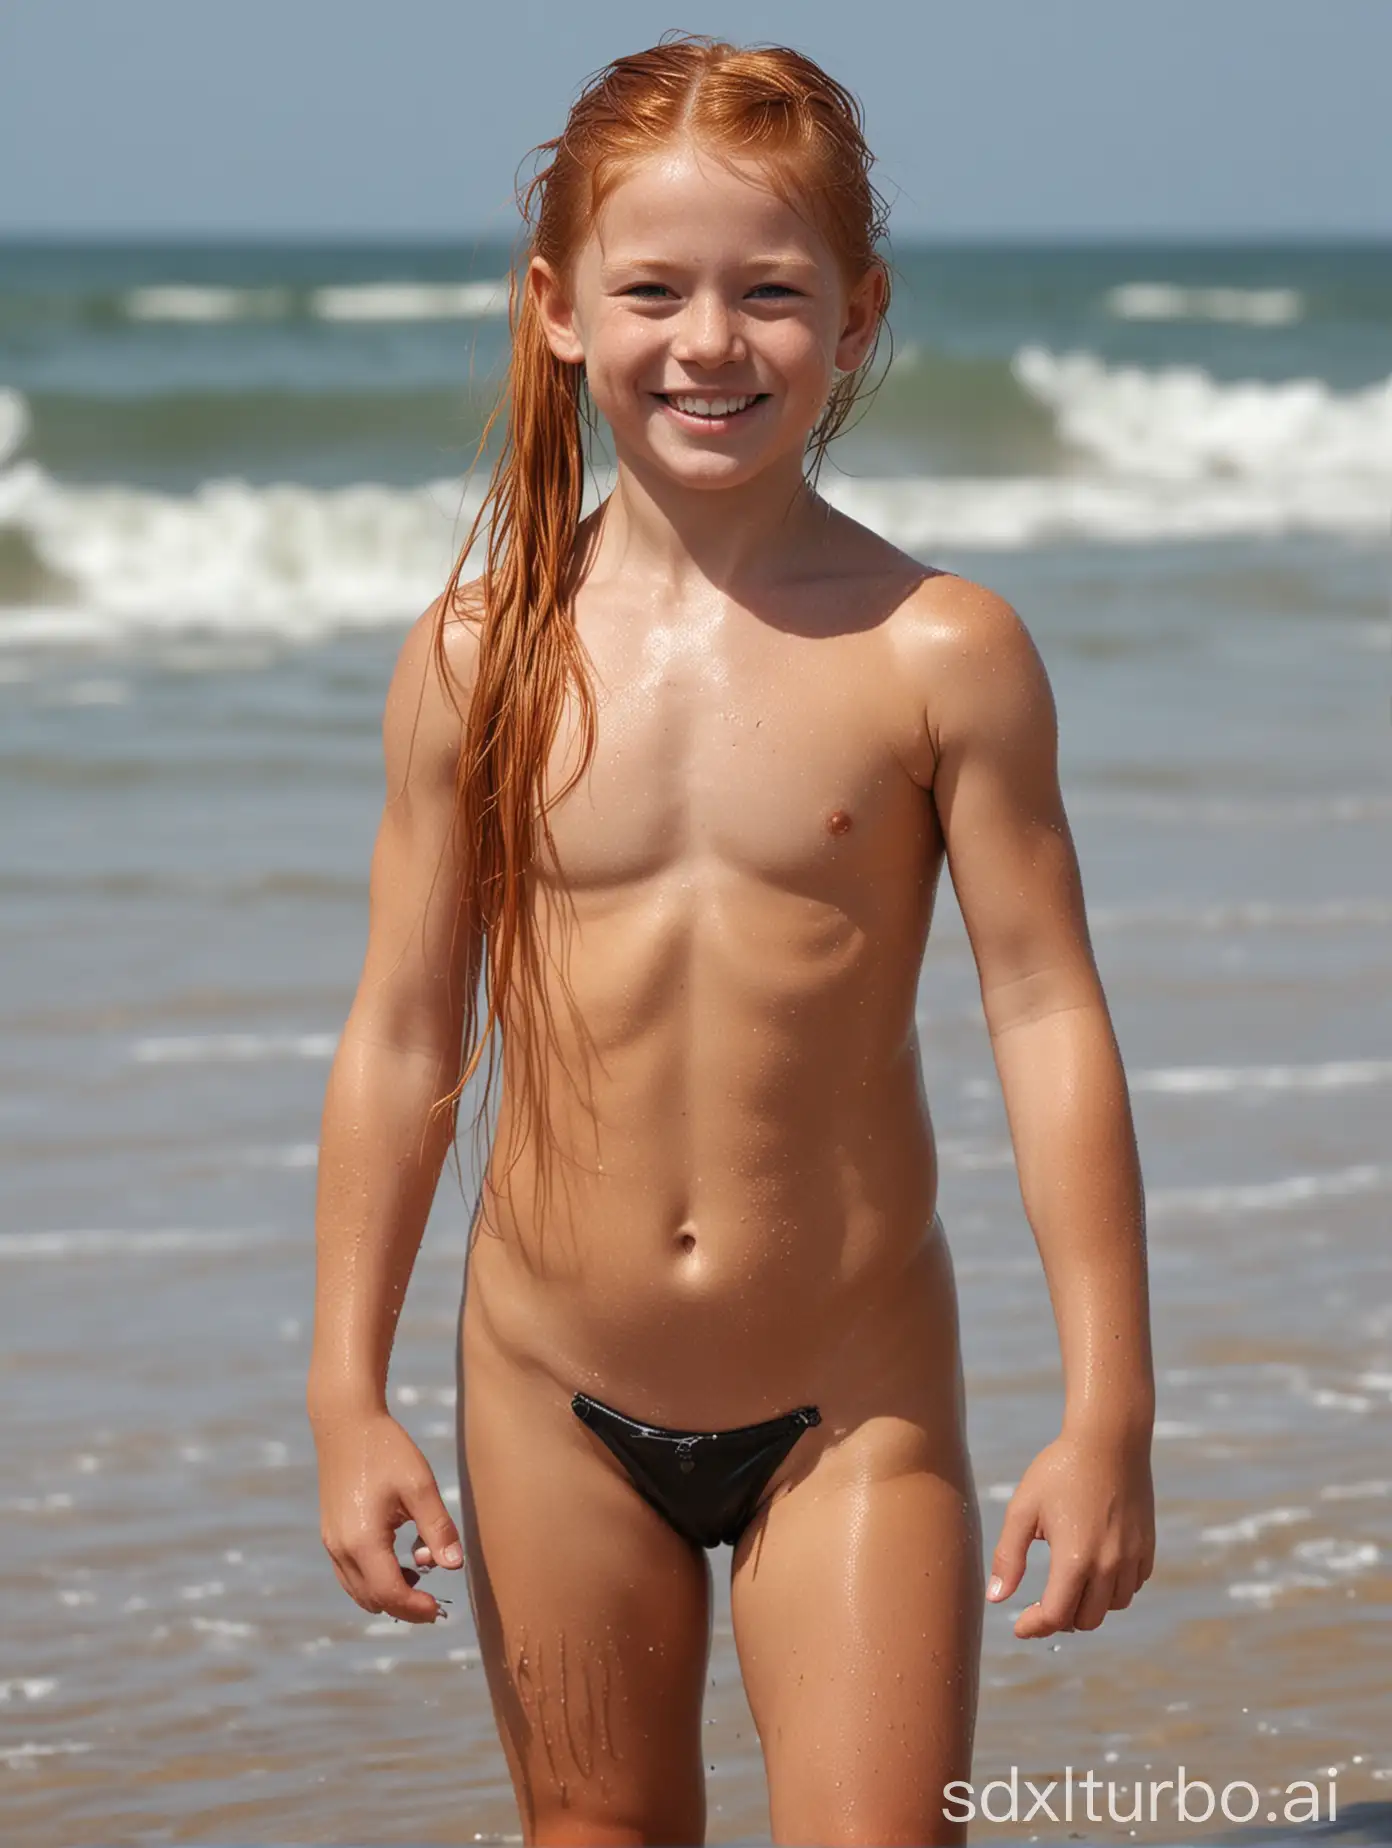 8 years old girl, long ginger hair in a ponytail, super mega muscular, topless leather bikini, smile, at the beach, wet